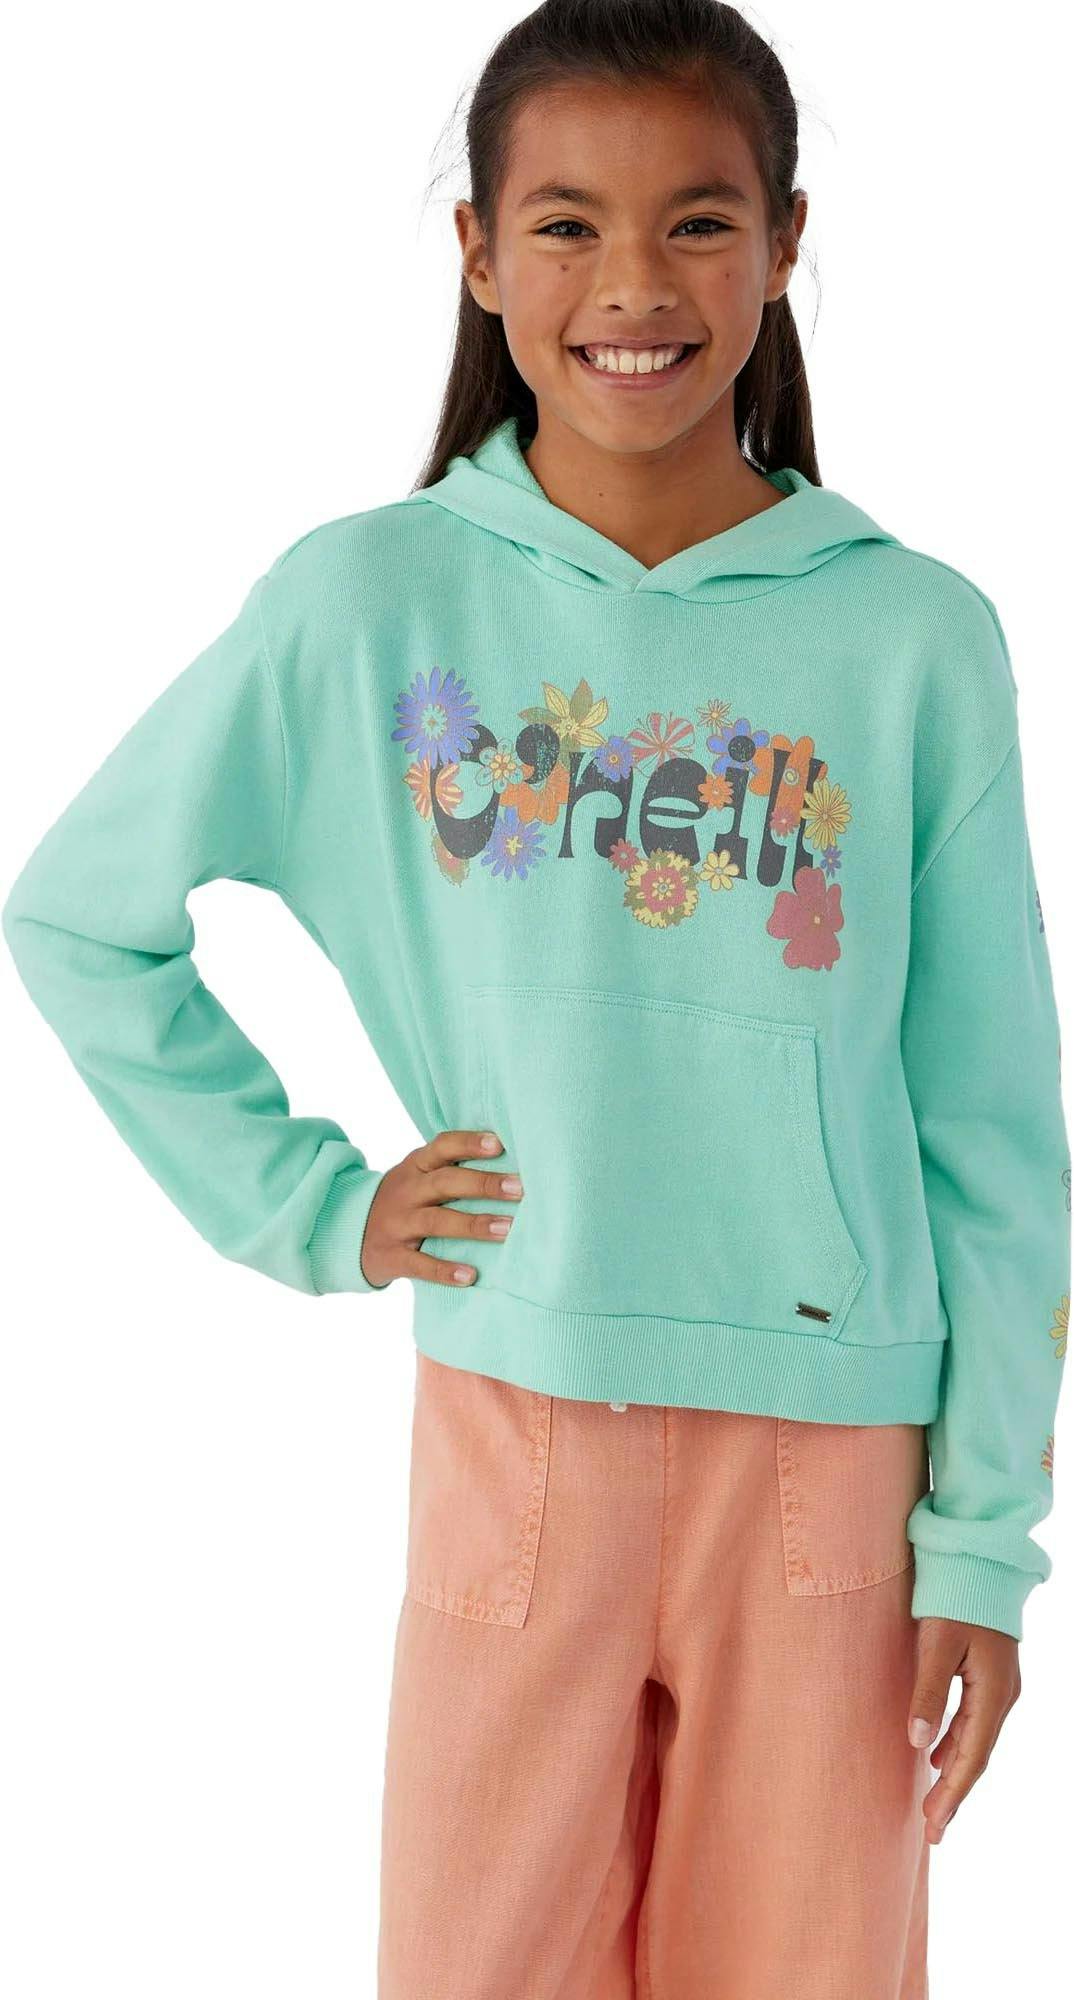 Product image for Scobie Pullover - Girls